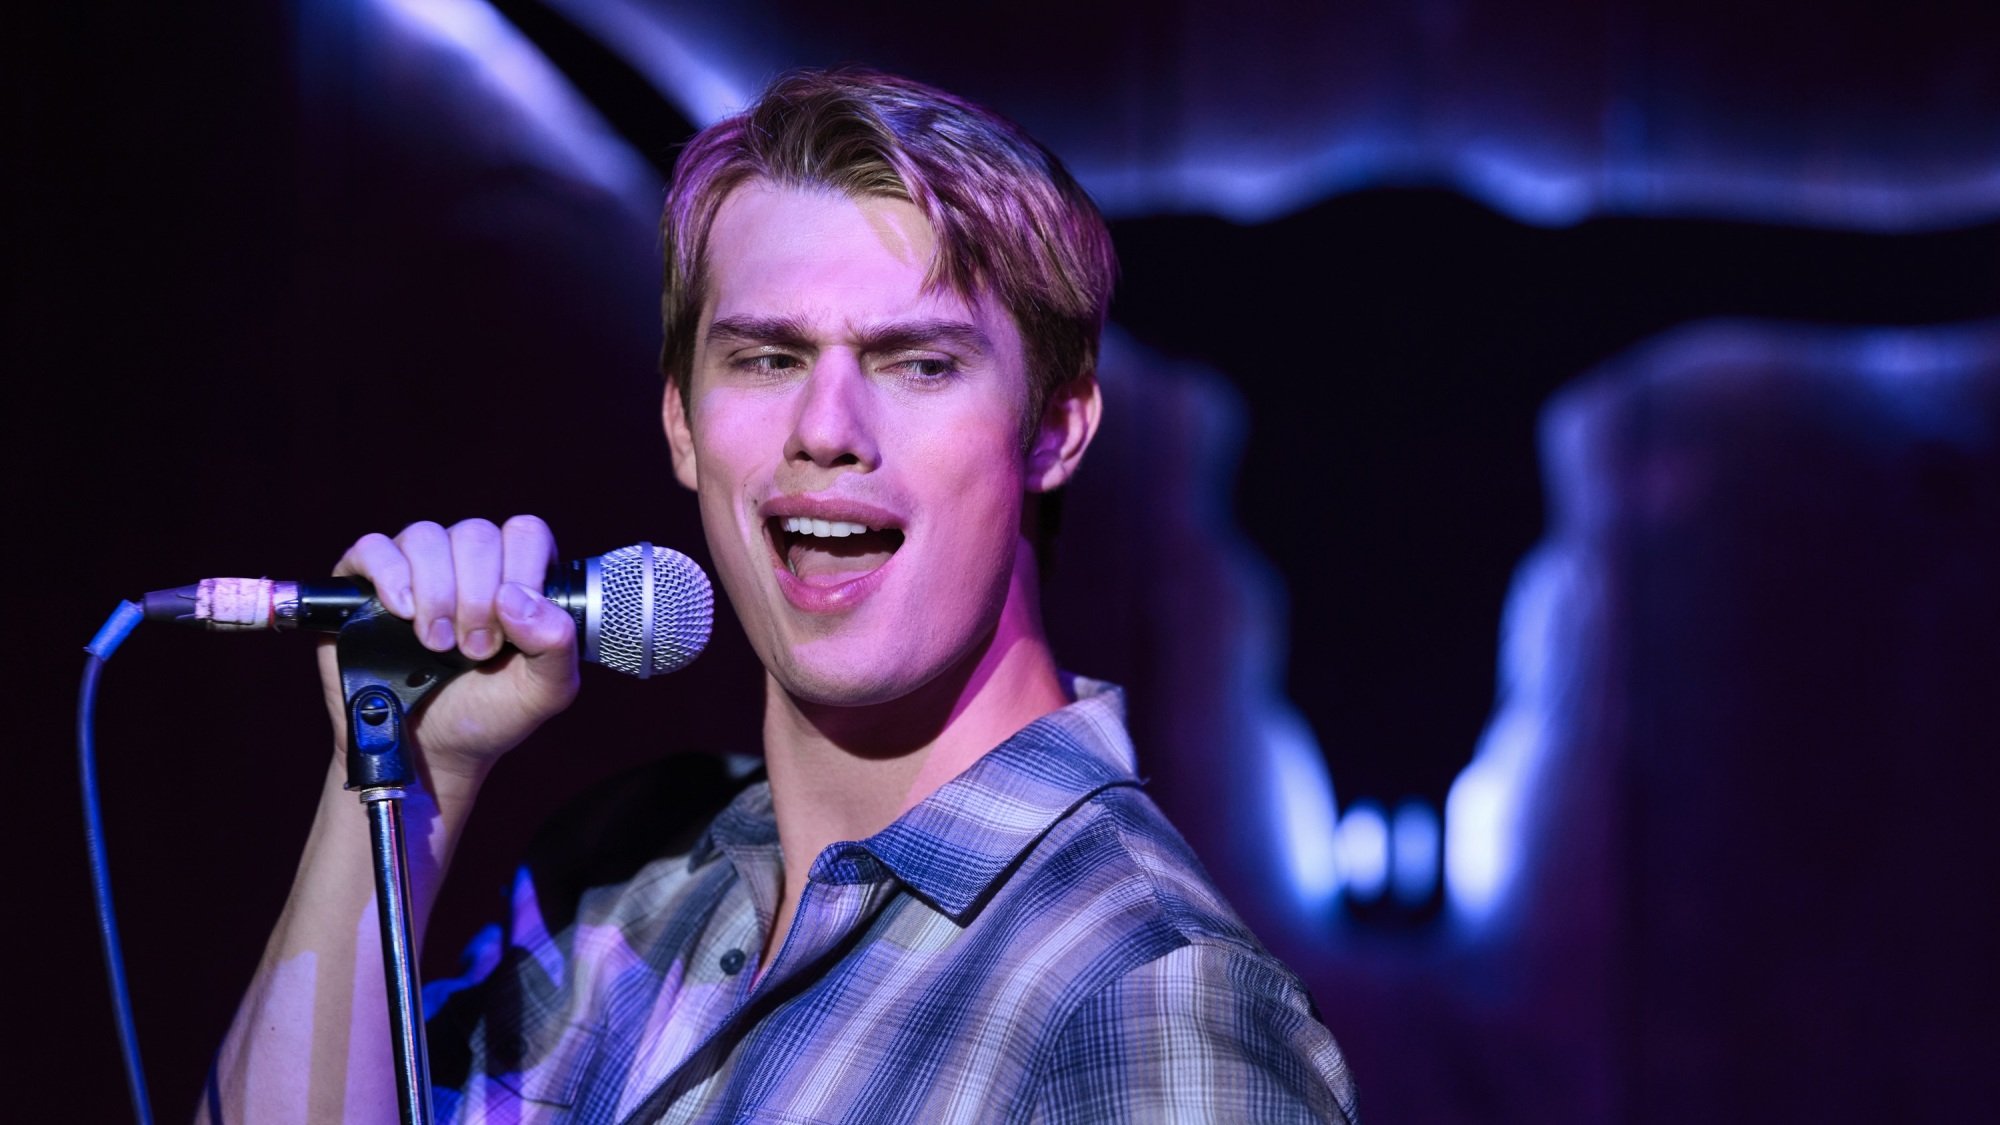 A blonde man in a blue checkered shirt sings passionate karaoke in a purple-lit bar.